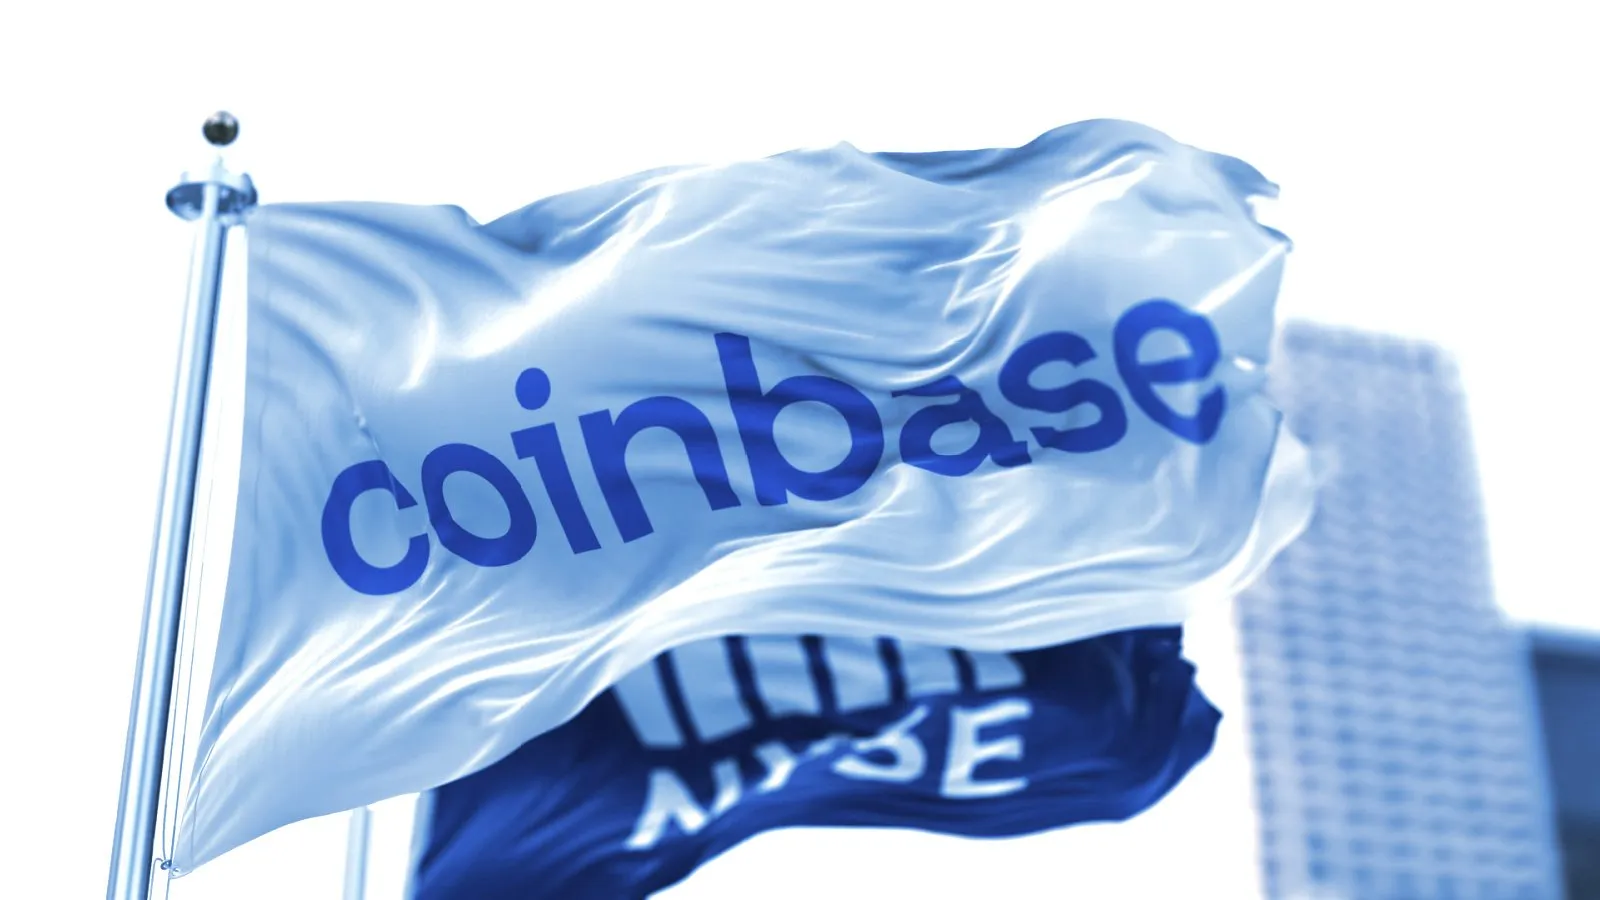 Coinbase is the top cryptocurrency exchange in the U.S. by trading volume. Image: Shutterstock